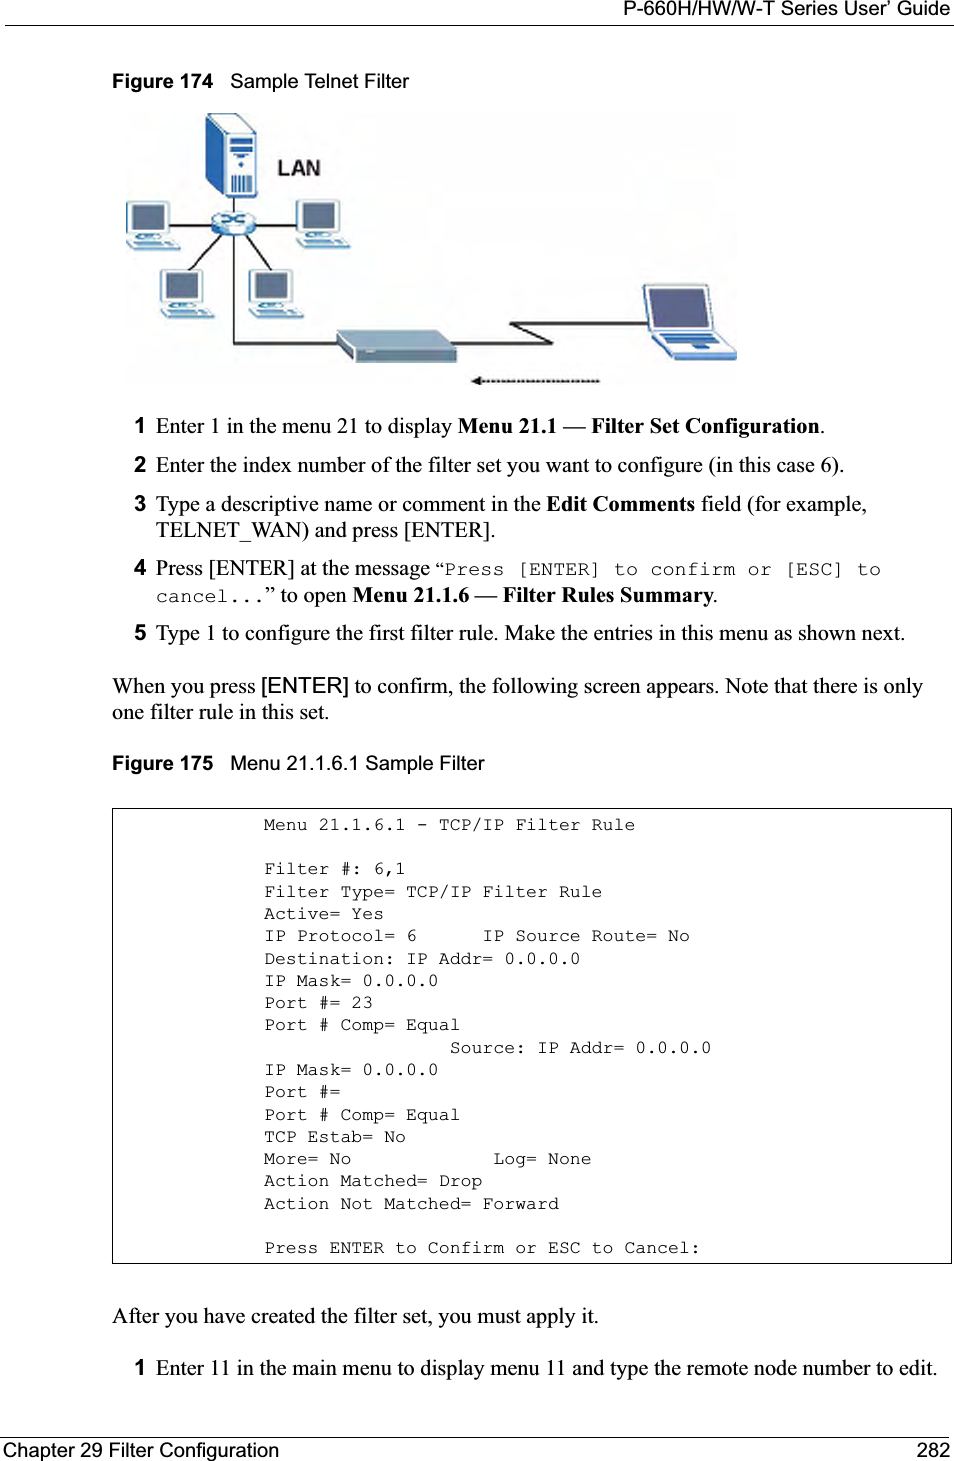 P-660H/HW/W-T Series User’ GuideChapter 29 Filter Configuration 282Figure 174   Sample Telnet Filter1Enter 1 in the menu 21 to display Menu 21.1 — Filter Set Configuration.2Enter the index number of the filter set you want to configure (in this case 6).3Type a descriptive name or comment in the Edit Comments field (for example, TELNET_WAN) and press [ENTER].4Press [ENTER] at the message “Press [ENTER] to confirm or [ESC] to cancel...” to open Menu 21.1.6 — Filter Rules Summary.5Type 1 to configure the first filter rule. Make the entries in this menu as shown next.When you press [ENTER] to confirm, the following screen appears. Note that there is only one filter rule in this set.Figure 175   Menu 21.1.6.1 Sample Filter After you have created the filter set, you must apply it.1Enter 11 in the main menu to display menu 11 and type the remote node number to edit.Menu 21.1.6.1 - TCP/IP Filter RuleFilter #: 6,1Filter Type= TCP/IP Filter RuleActive= YesIP Protocol= 6      IP Source Route= NoDestination: IP Addr= 0.0.0.0IP Mask= 0.0.0.0Port #= 23Port # Comp= Equal                 Source: IP Addr= 0.0.0.0IP Mask= 0.0.0.0Port #= Port # Comp= EqualTCP Estab= NoMore= No             Log= NoneAction Matched= DropAction Not Matched= ForwardPress ENTER to Confirm or ESC to Cancel: